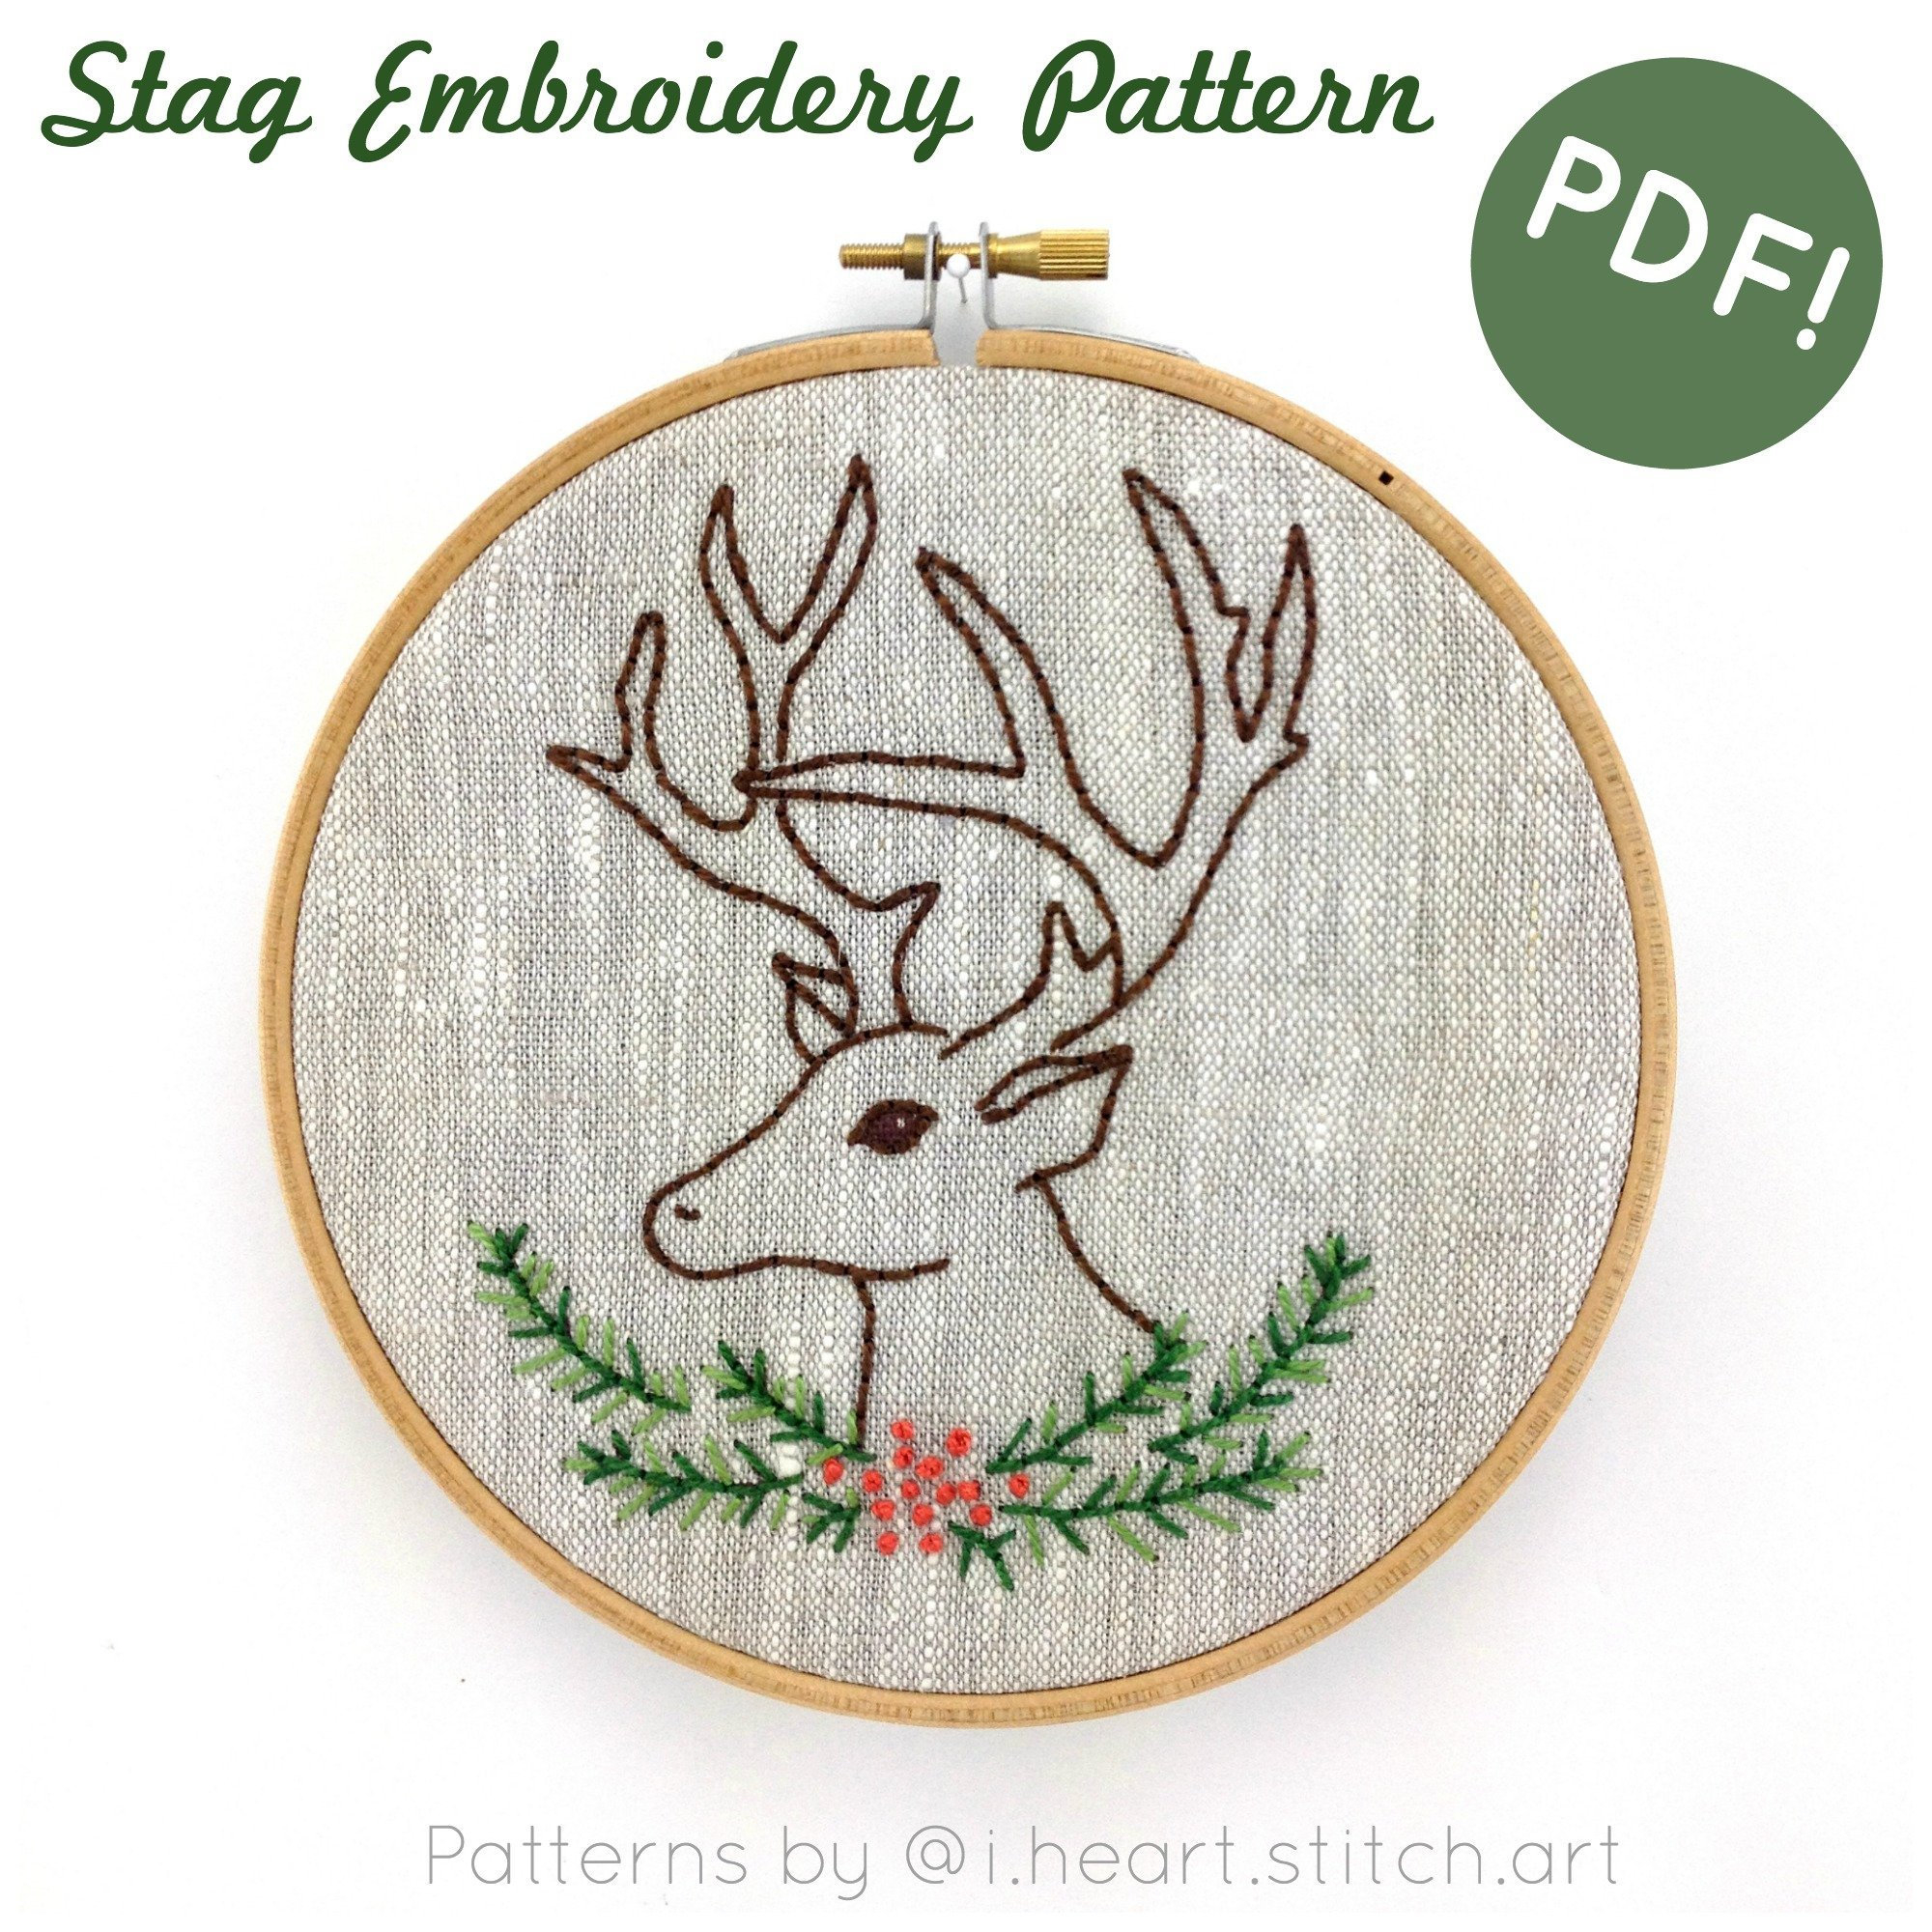 How To Make Your Own Embroidery Pattern Stag Embroidery Pattern Digital Download